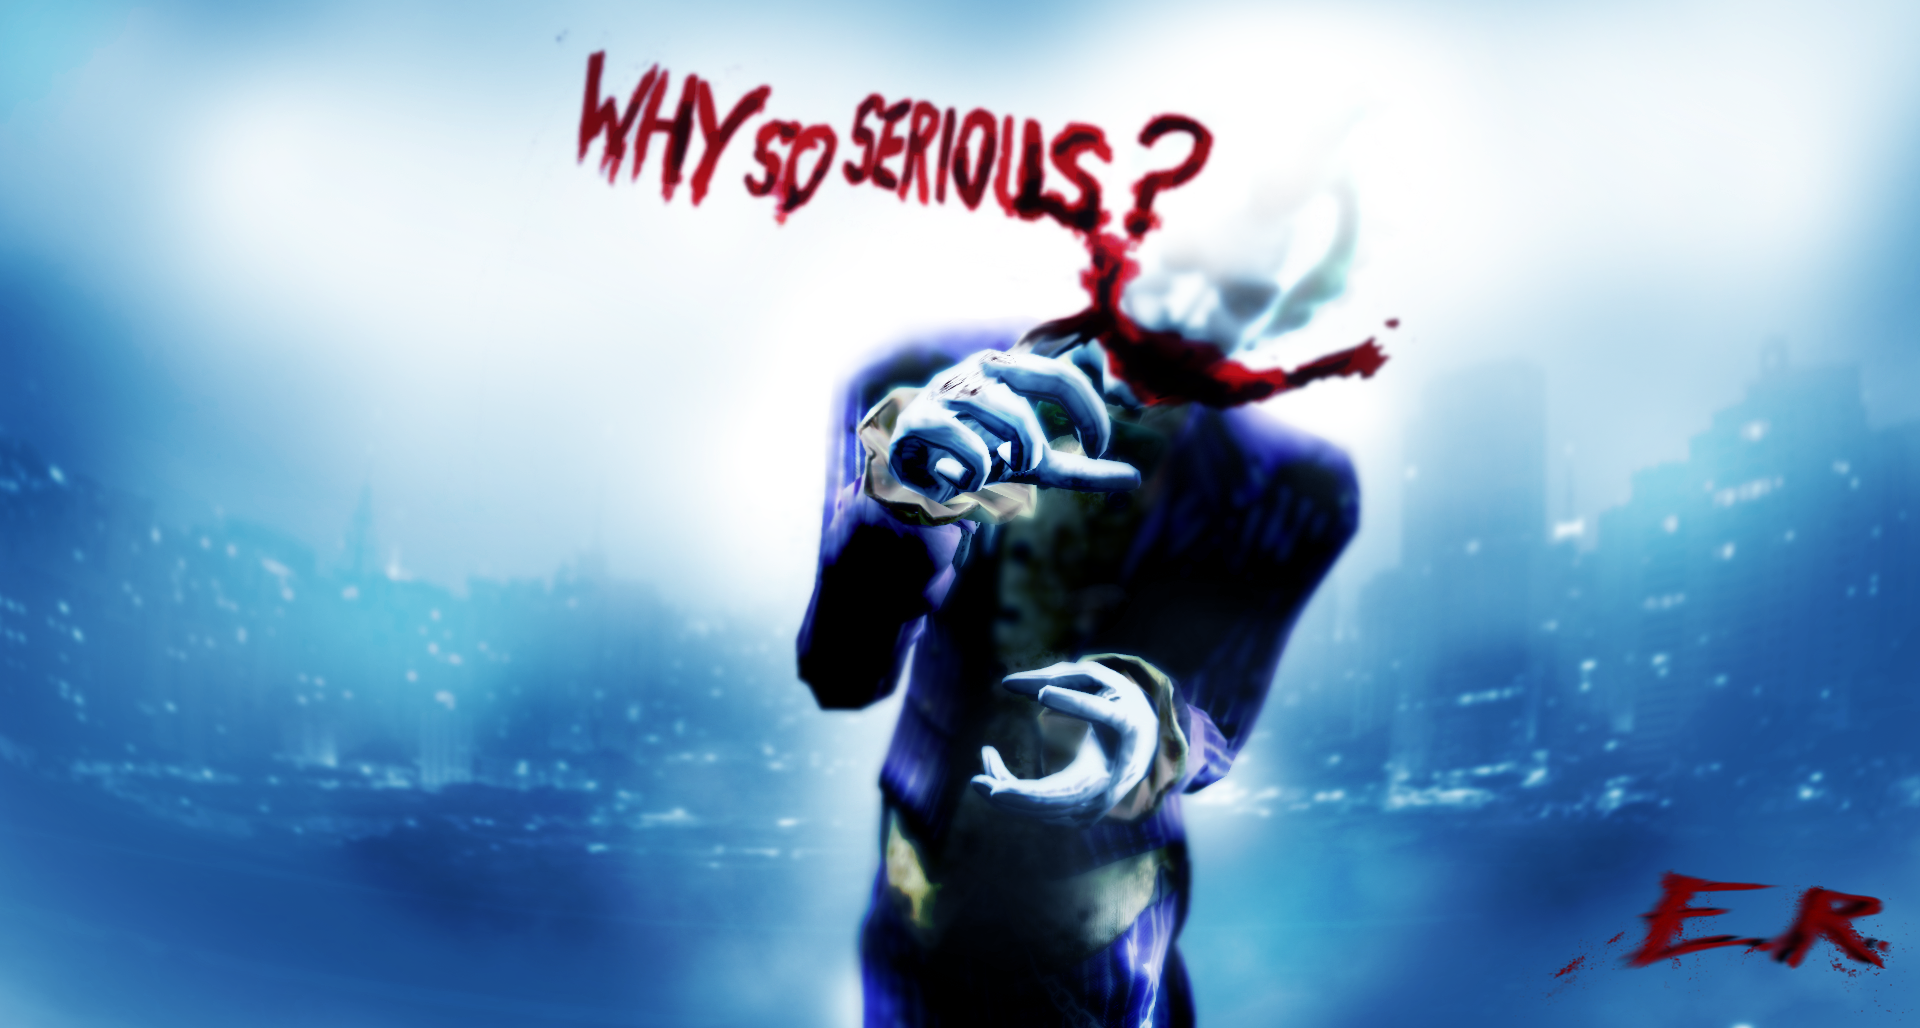 Why So Serious By Iireii